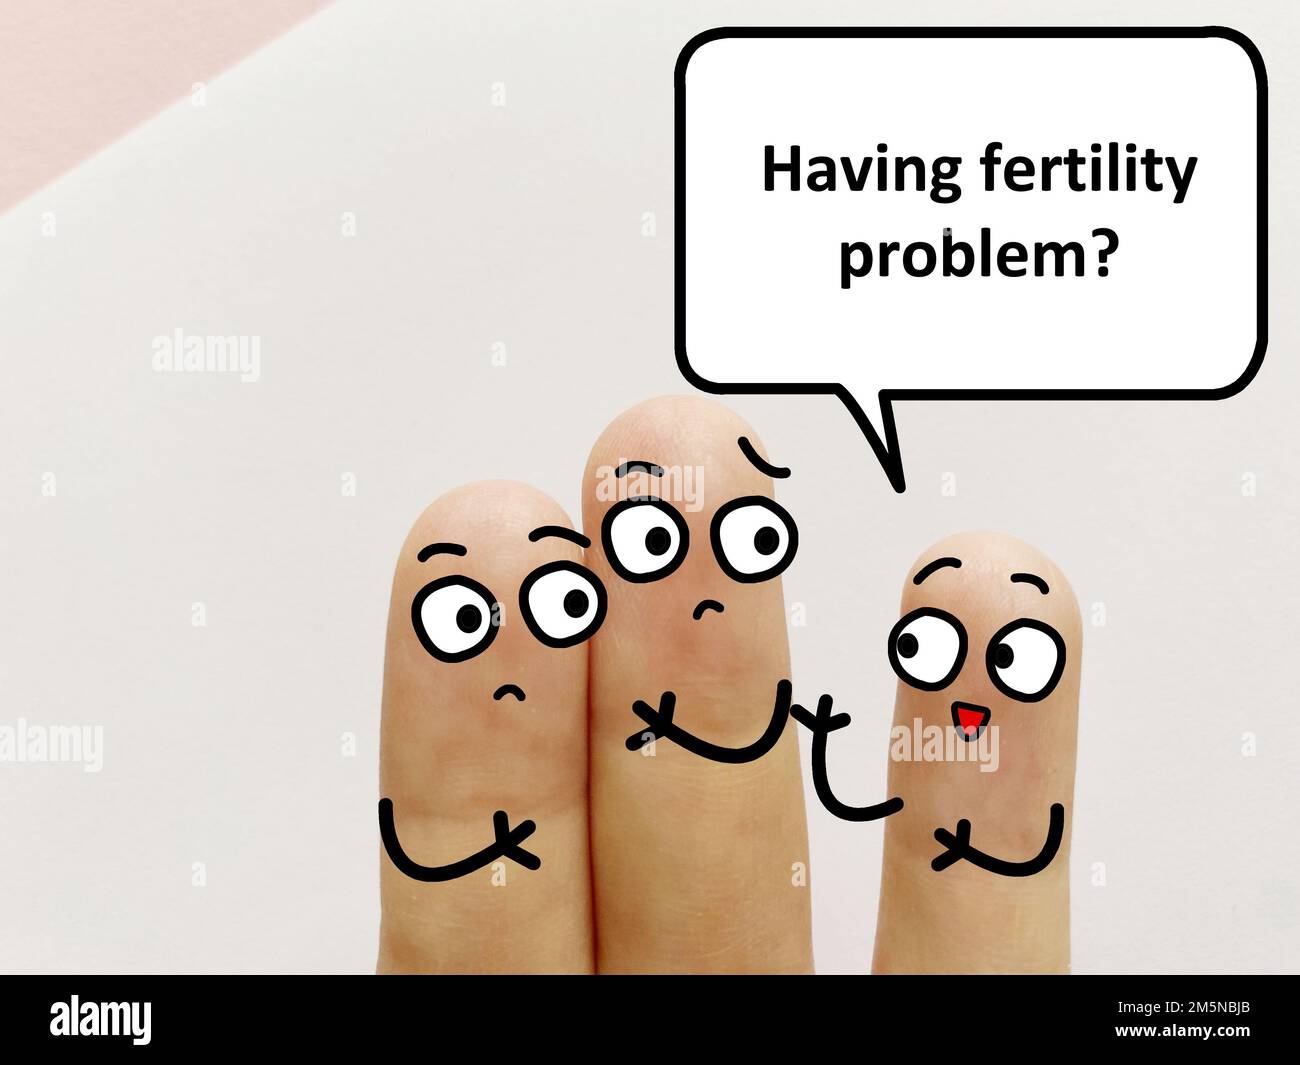 Three fingers are decorated as three person. One of them is asking if they are having fertility problem. Stock Photo